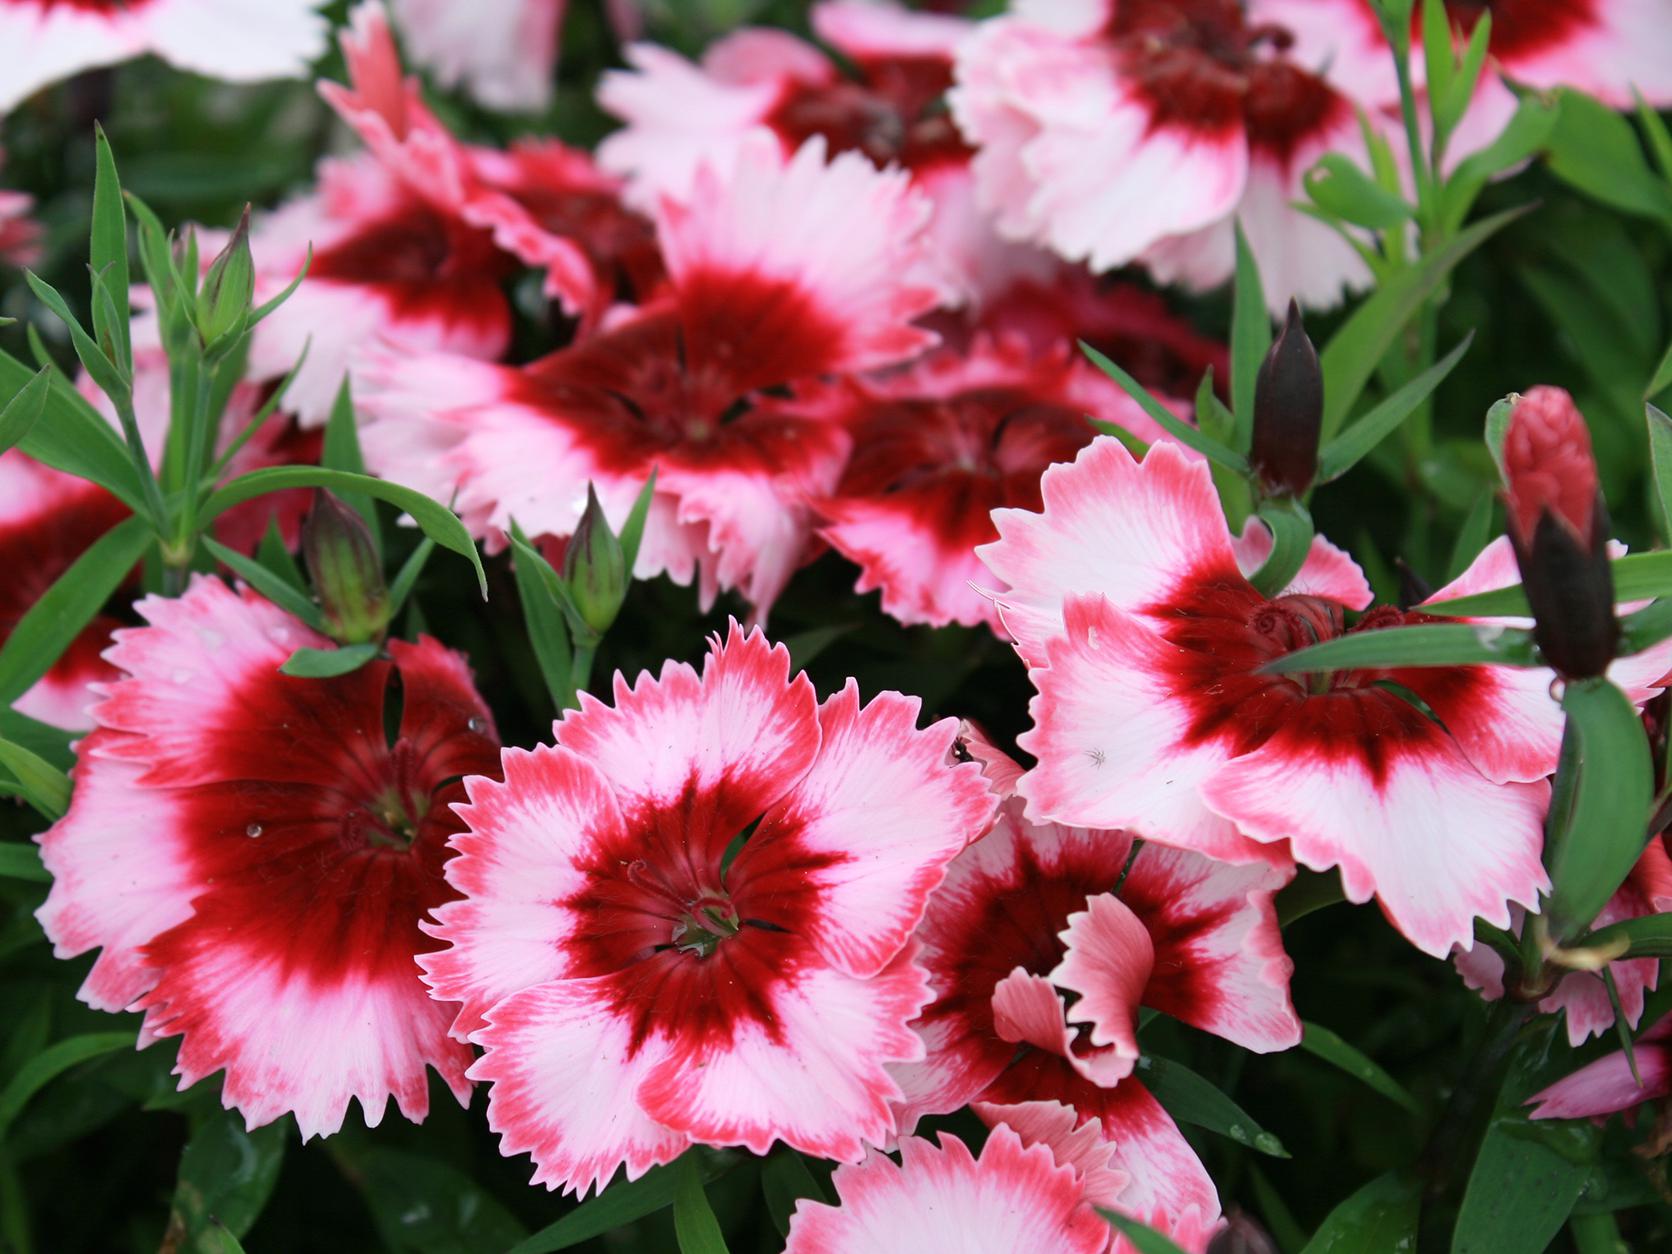 A cluster of ruffled pink flowers with vivid red centers is pictured on green stems.